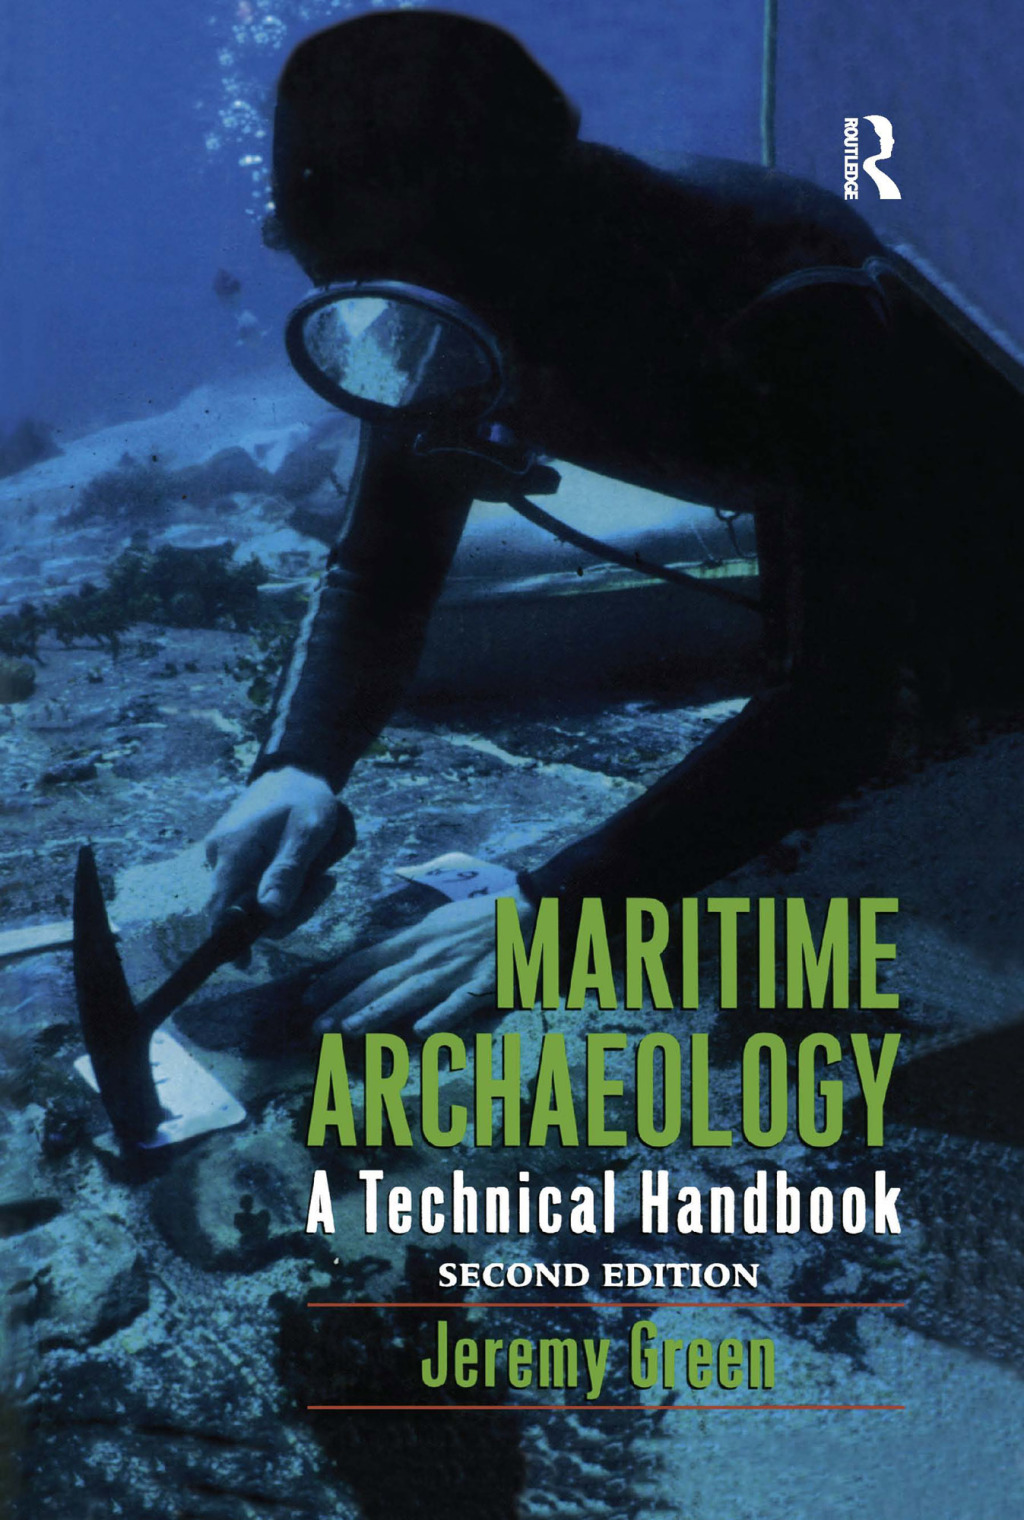 Maritime Archaeology - 2nd Edition (eBook)